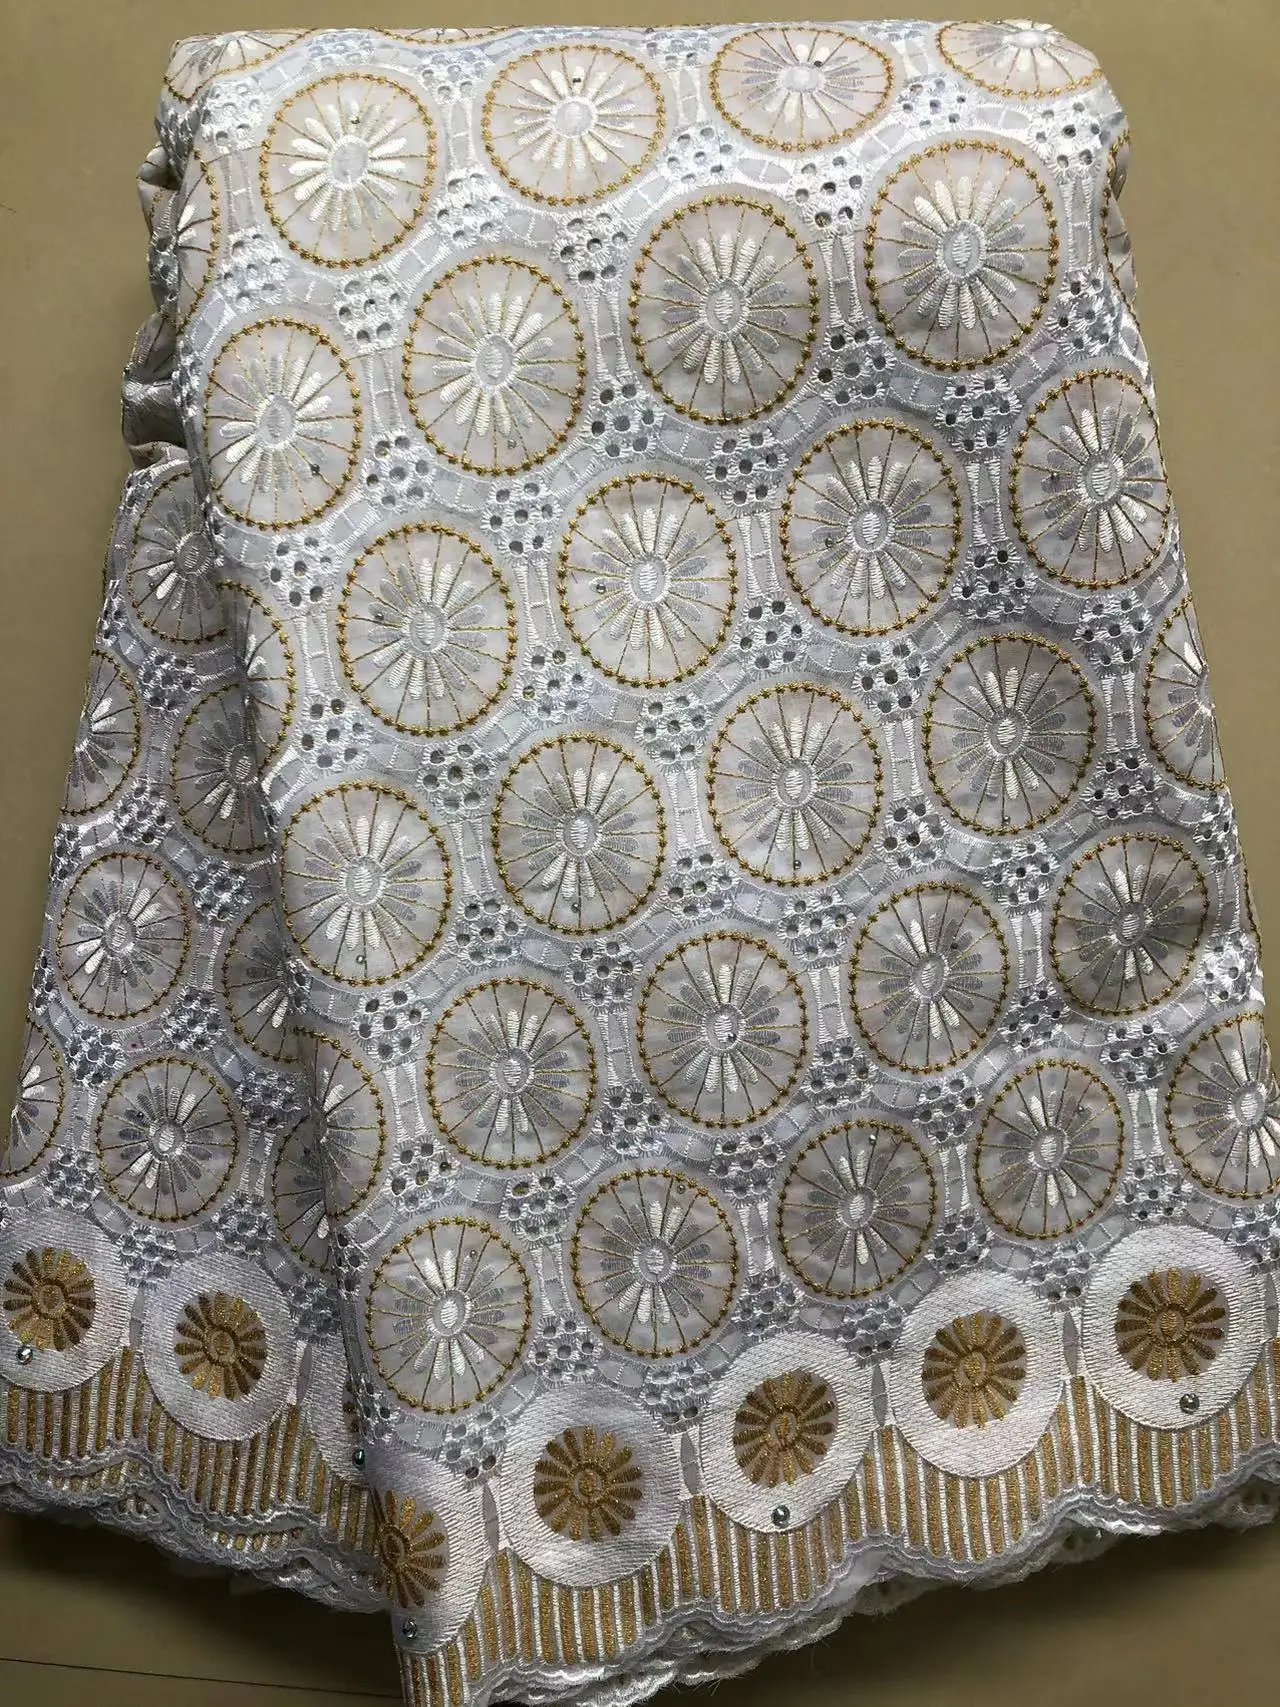 African Cotton Lace Fabric 2023 High Quality Swiss Voile Lace In Switzerland With Stones Nigerian Lace Fabrics For Wedding Dress 2021 high quality african lace fabric swiss dry lace fabric nigerian lace fabrics swiss voile lace in switzerland ty005